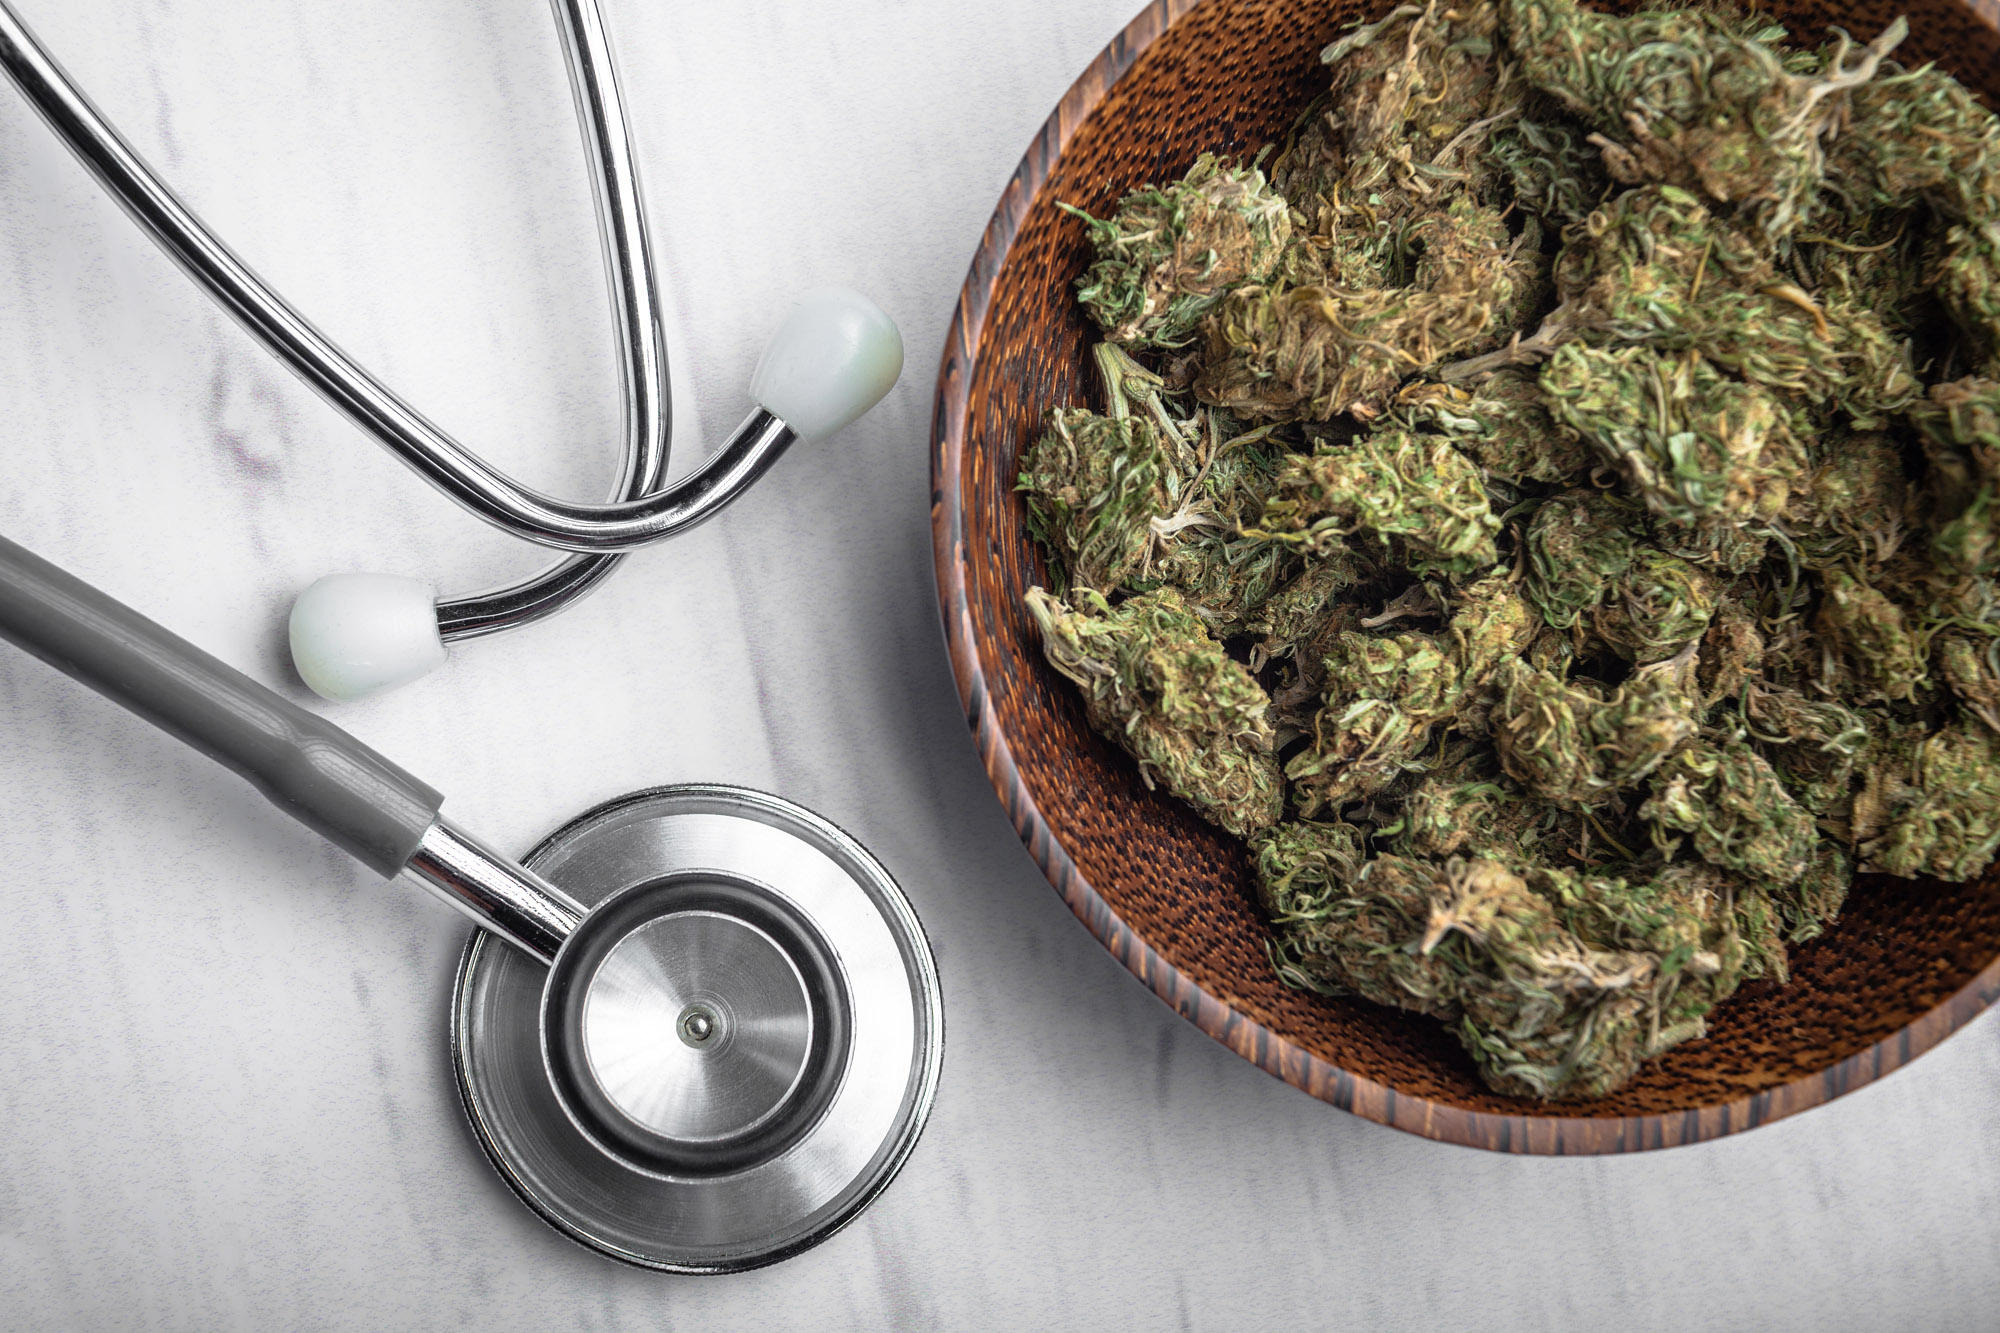 Medical Cannabis Provides Holistic Safe Relief